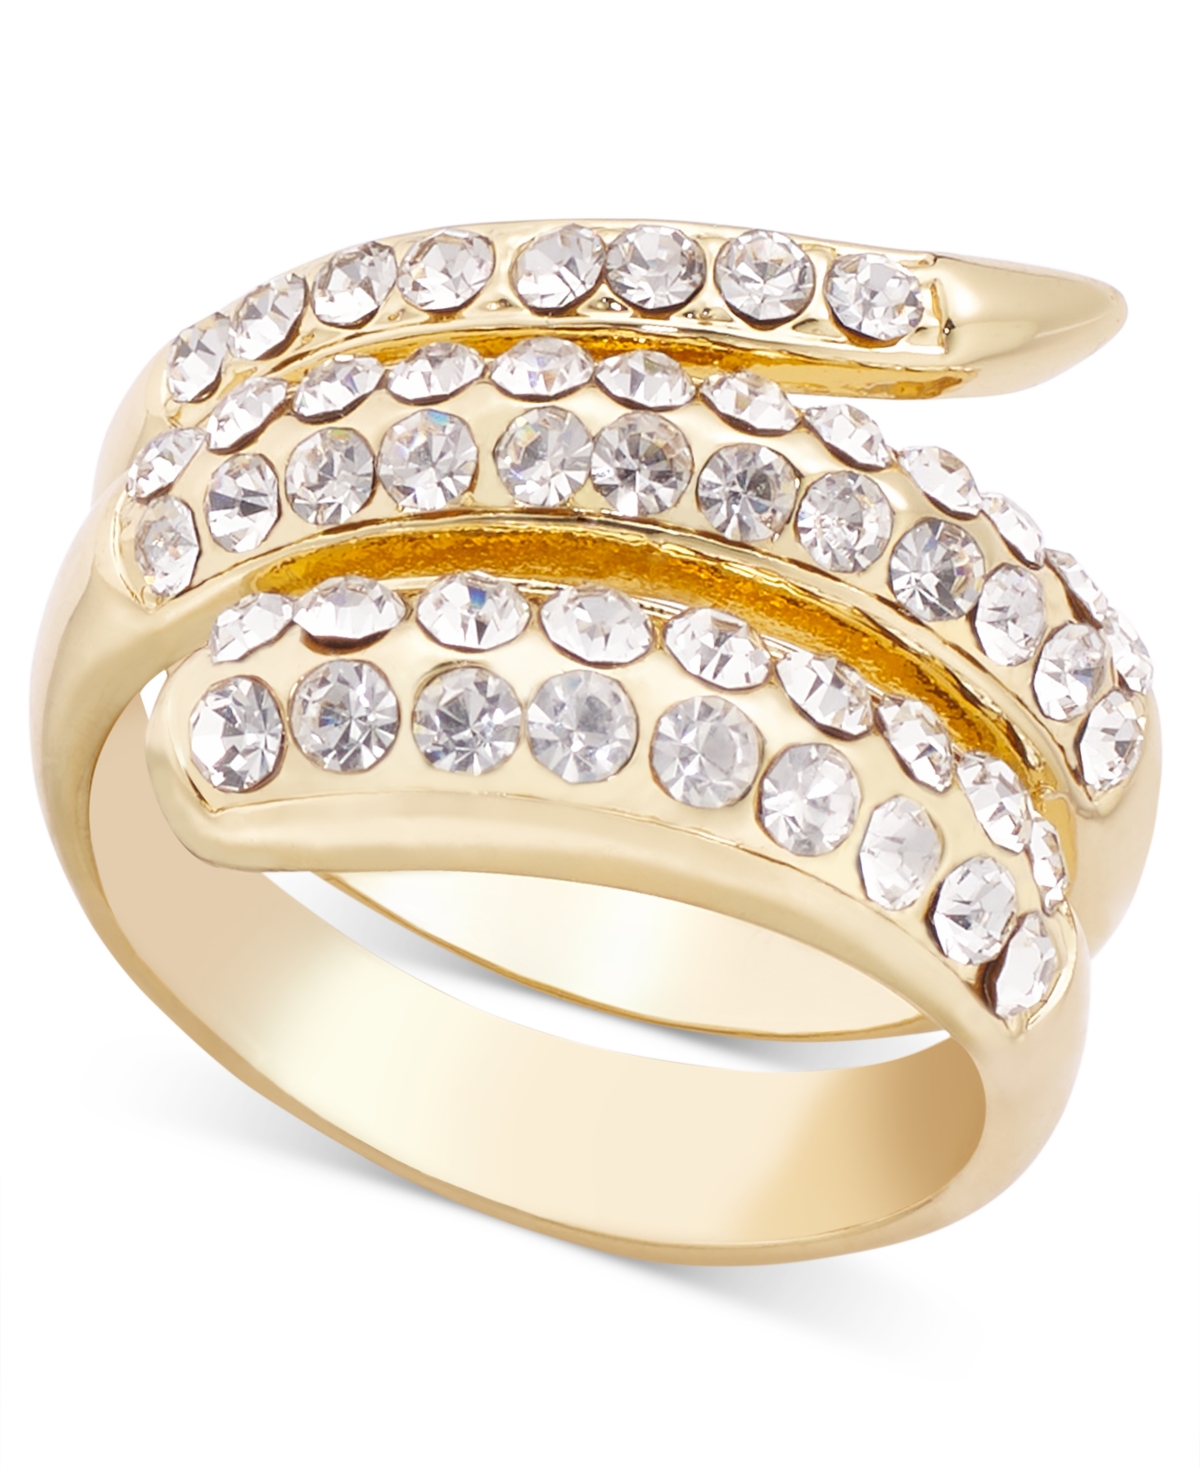 Gold-Tone Crystal Wrap Ring, Created for Macy's - Gold